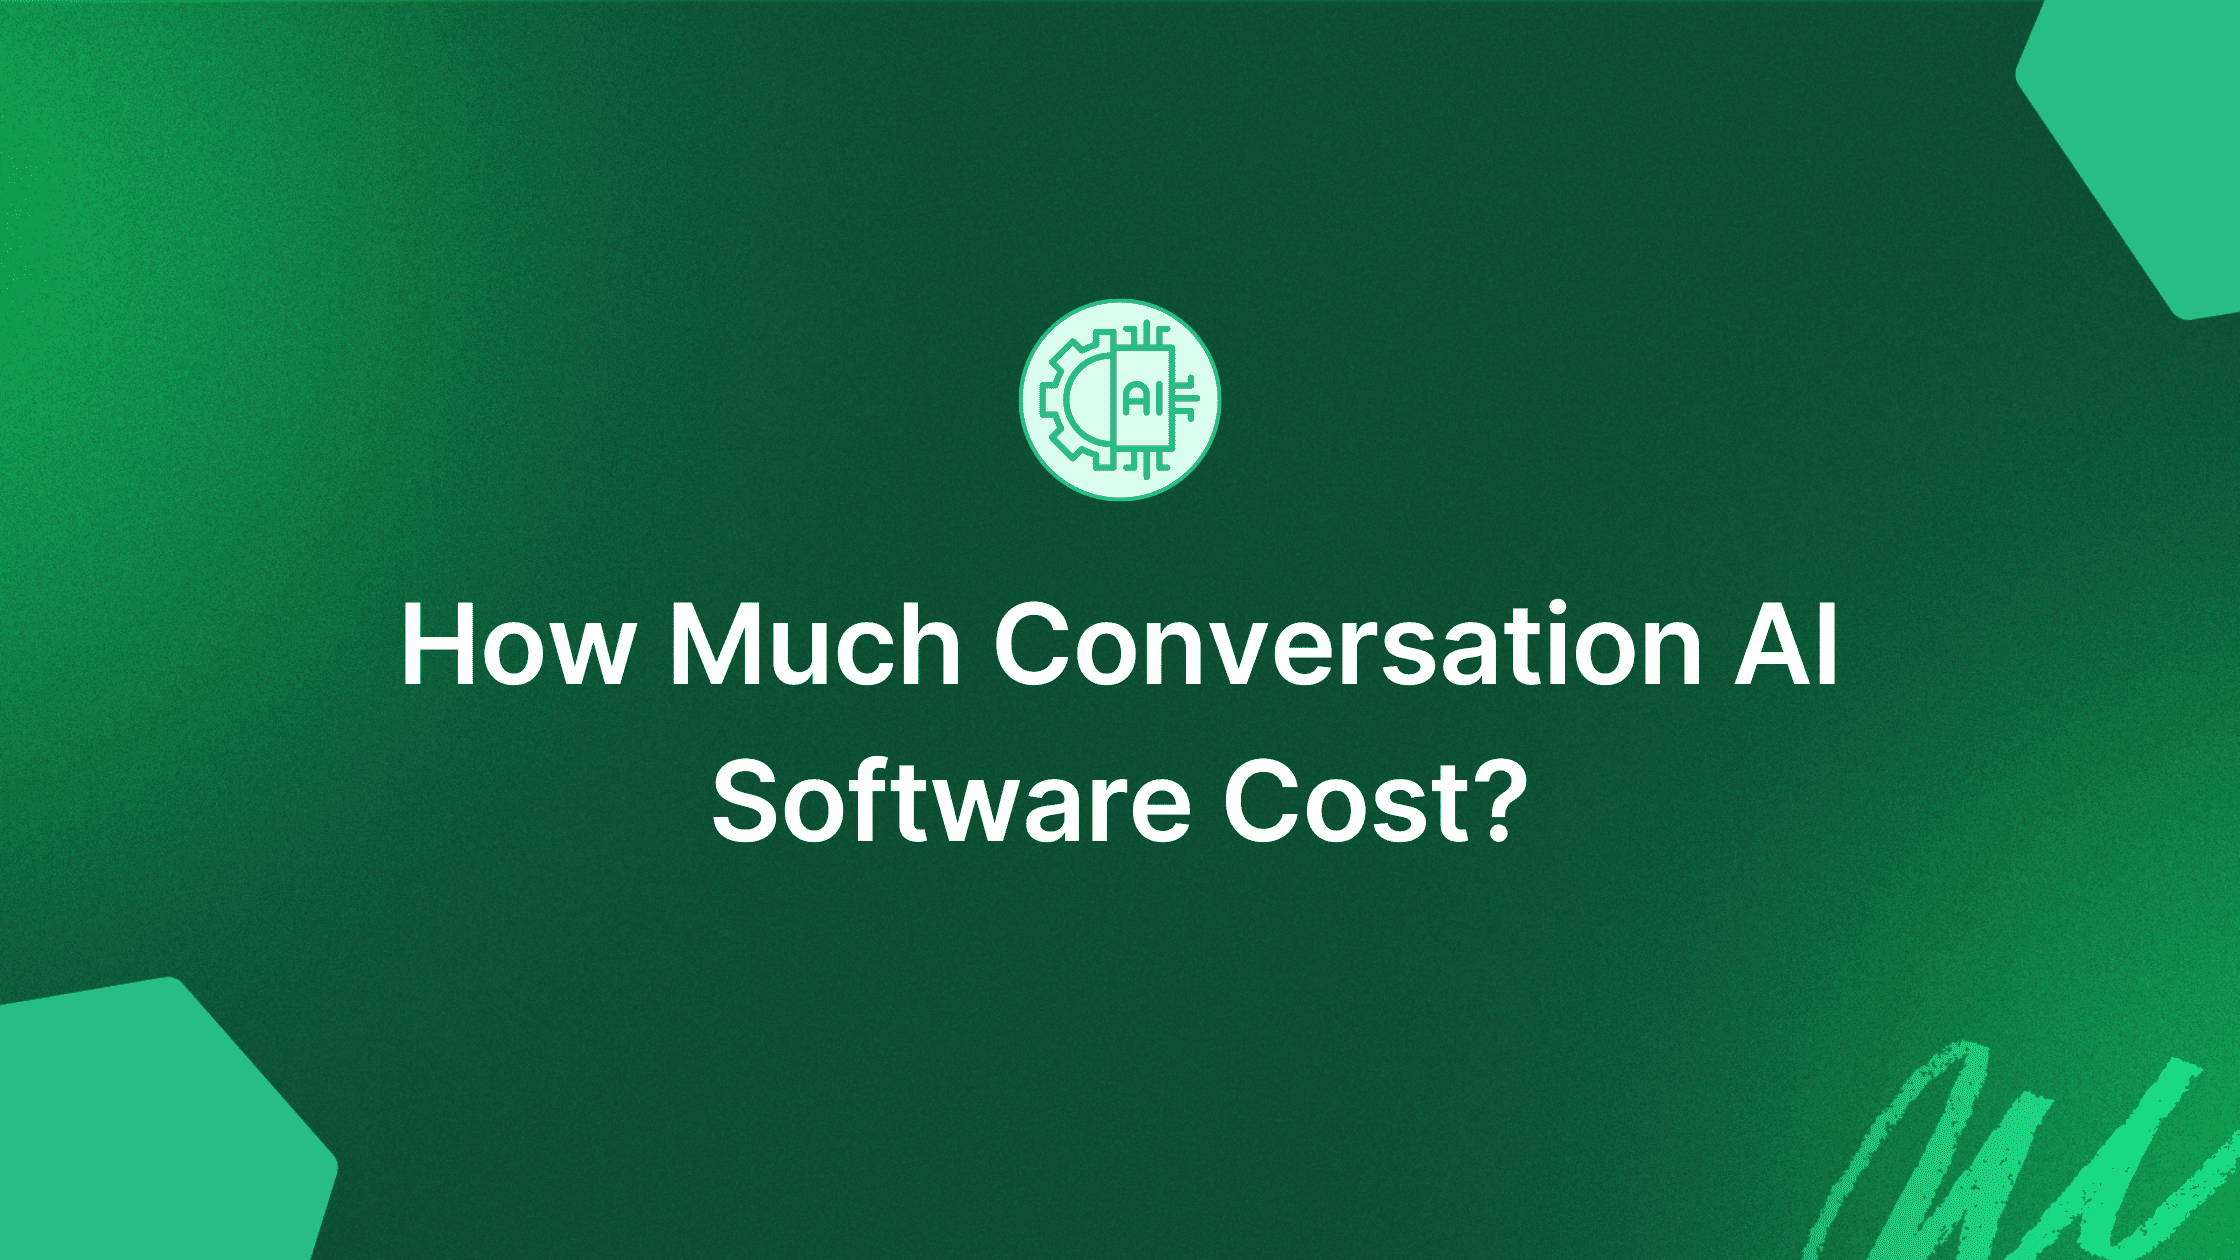 How much does conversational AI software cost?